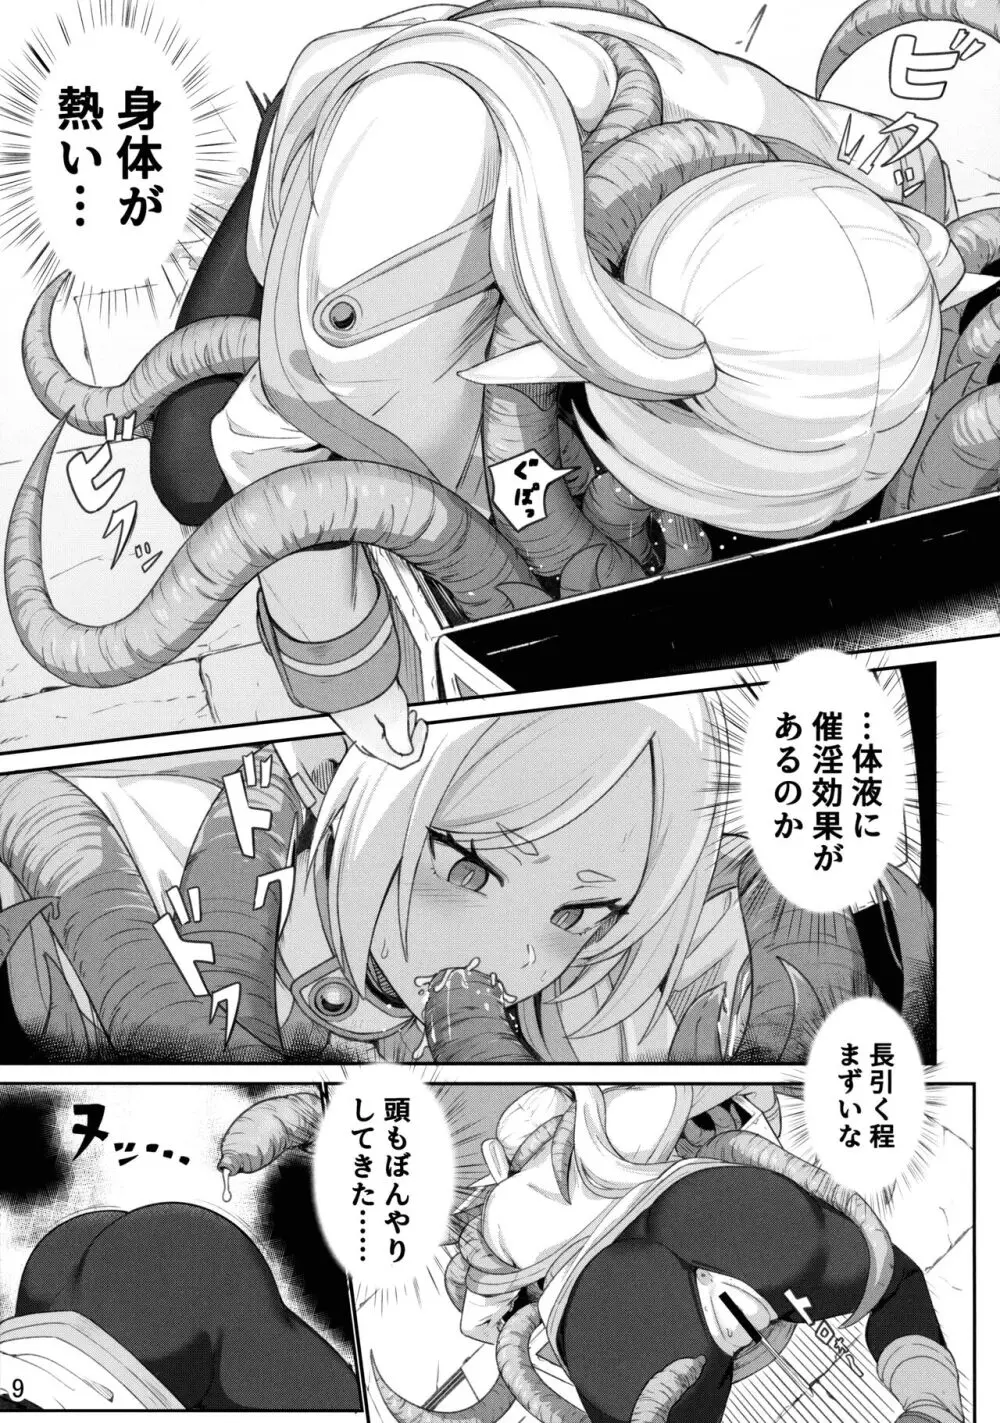 FRIEREN'S ちょっとHな本 - page11